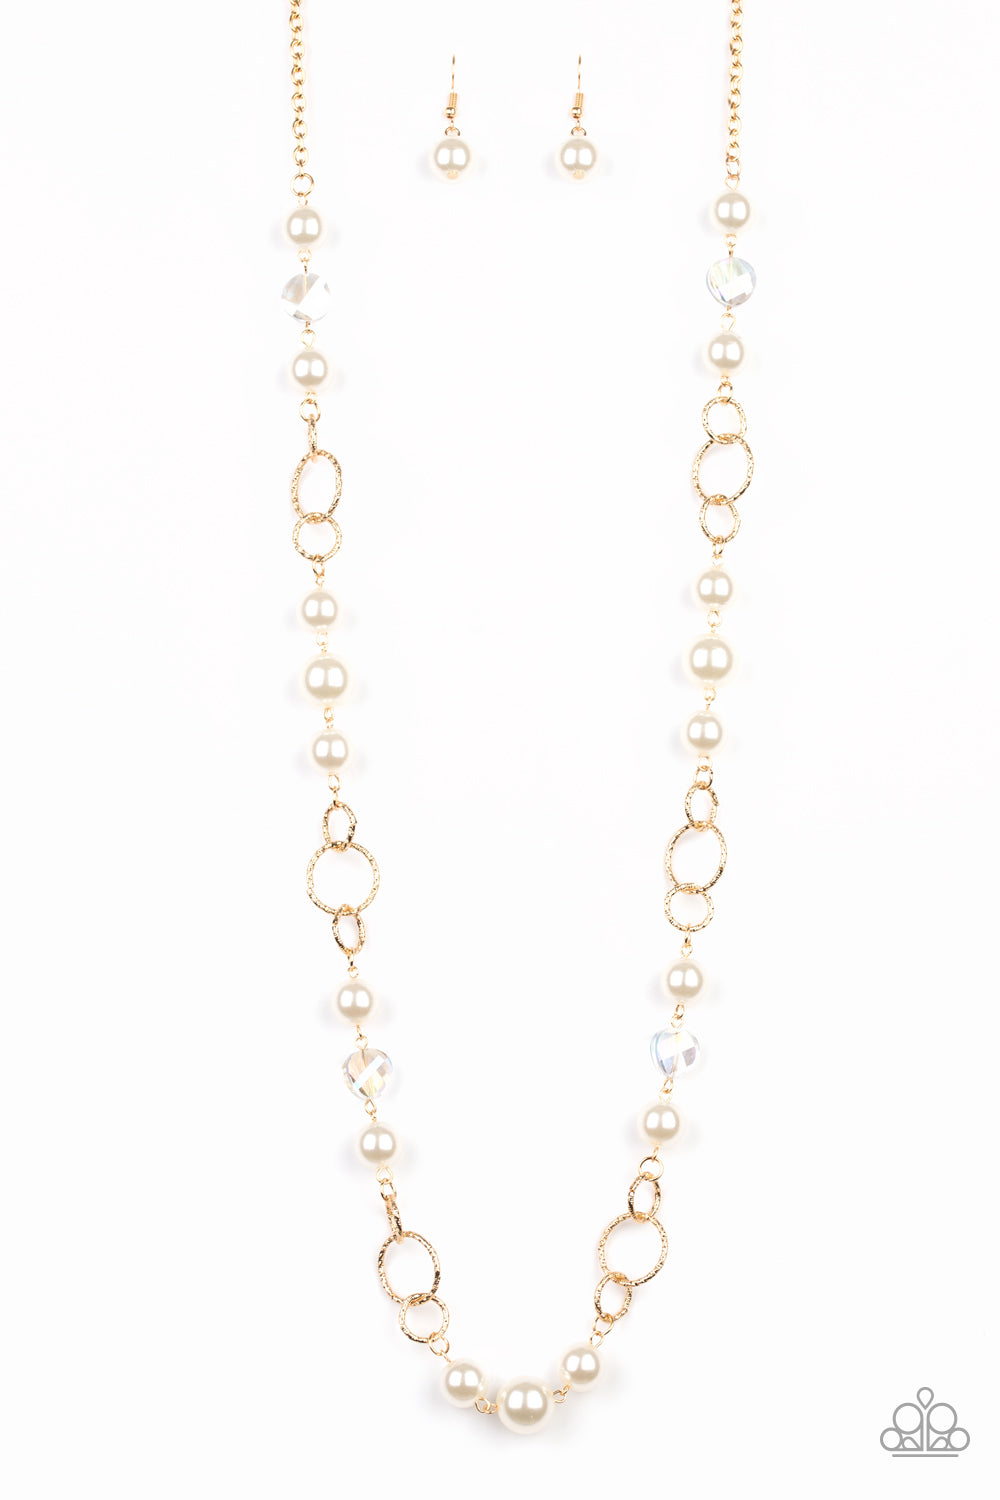 Prized Pearls Gold Necklace - Paparazzi Accessories